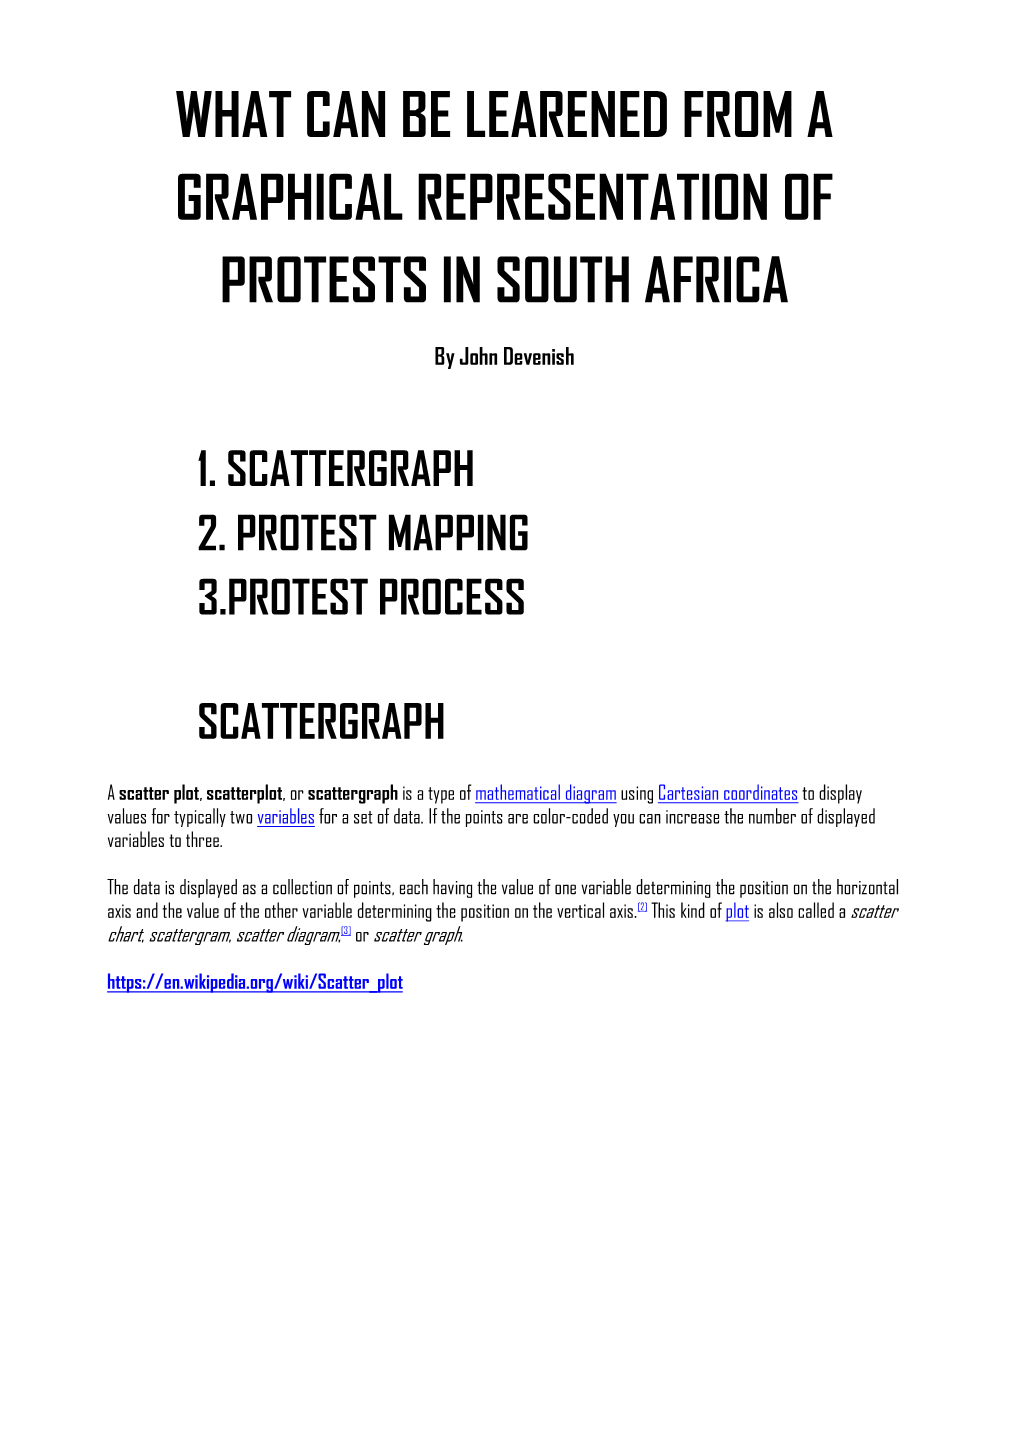 What Can Be Learened from a Graphical Representation of Protests in South Africa